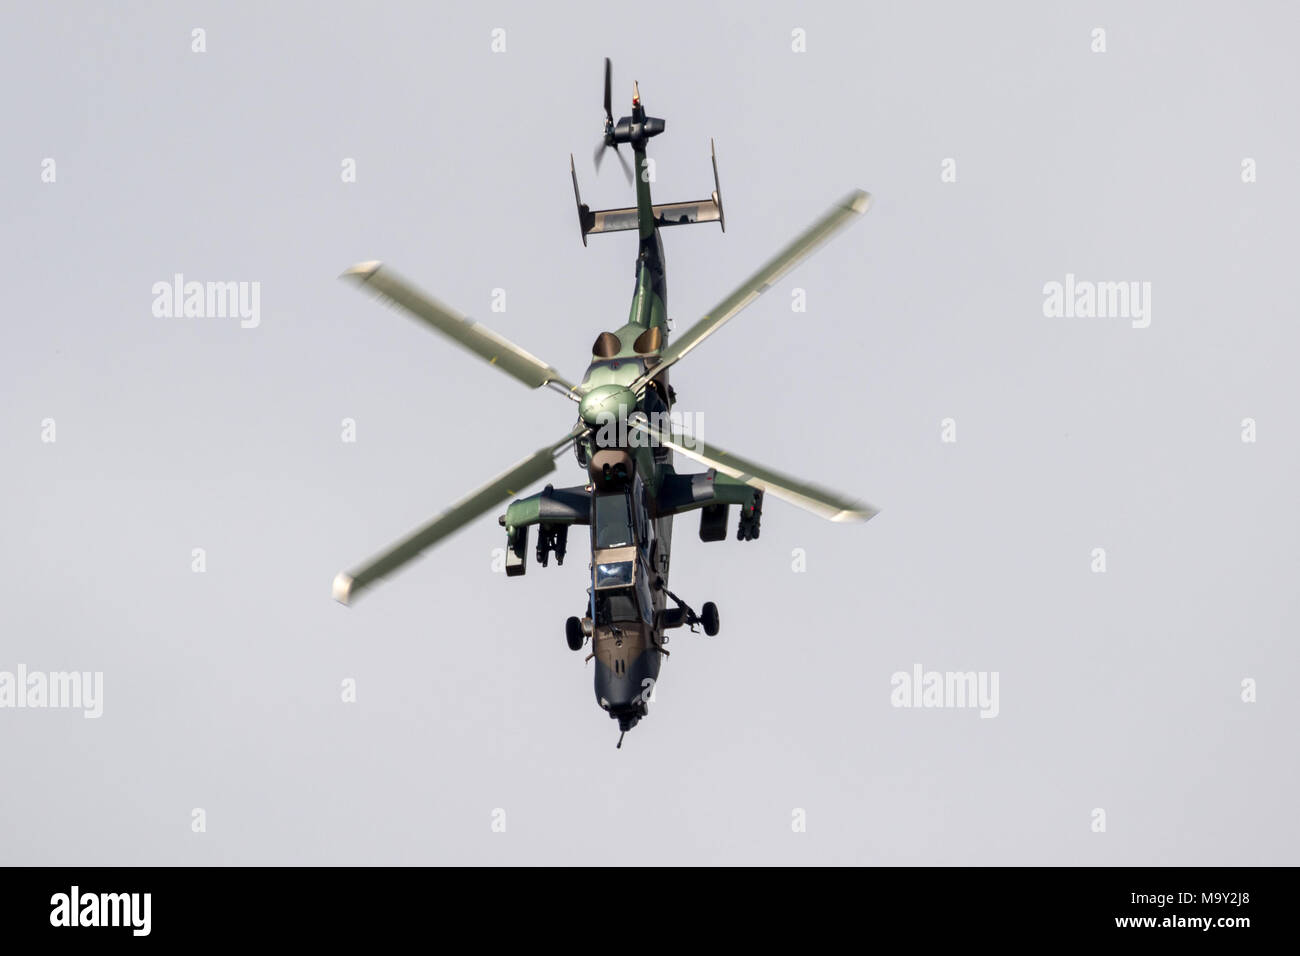 PARIS, FRANCE - JUN 23, 2017: French Army Eurocopter Airbus EC665 Tigre attack helicopter flying at the Paris Air Show 2017 Stock Photo